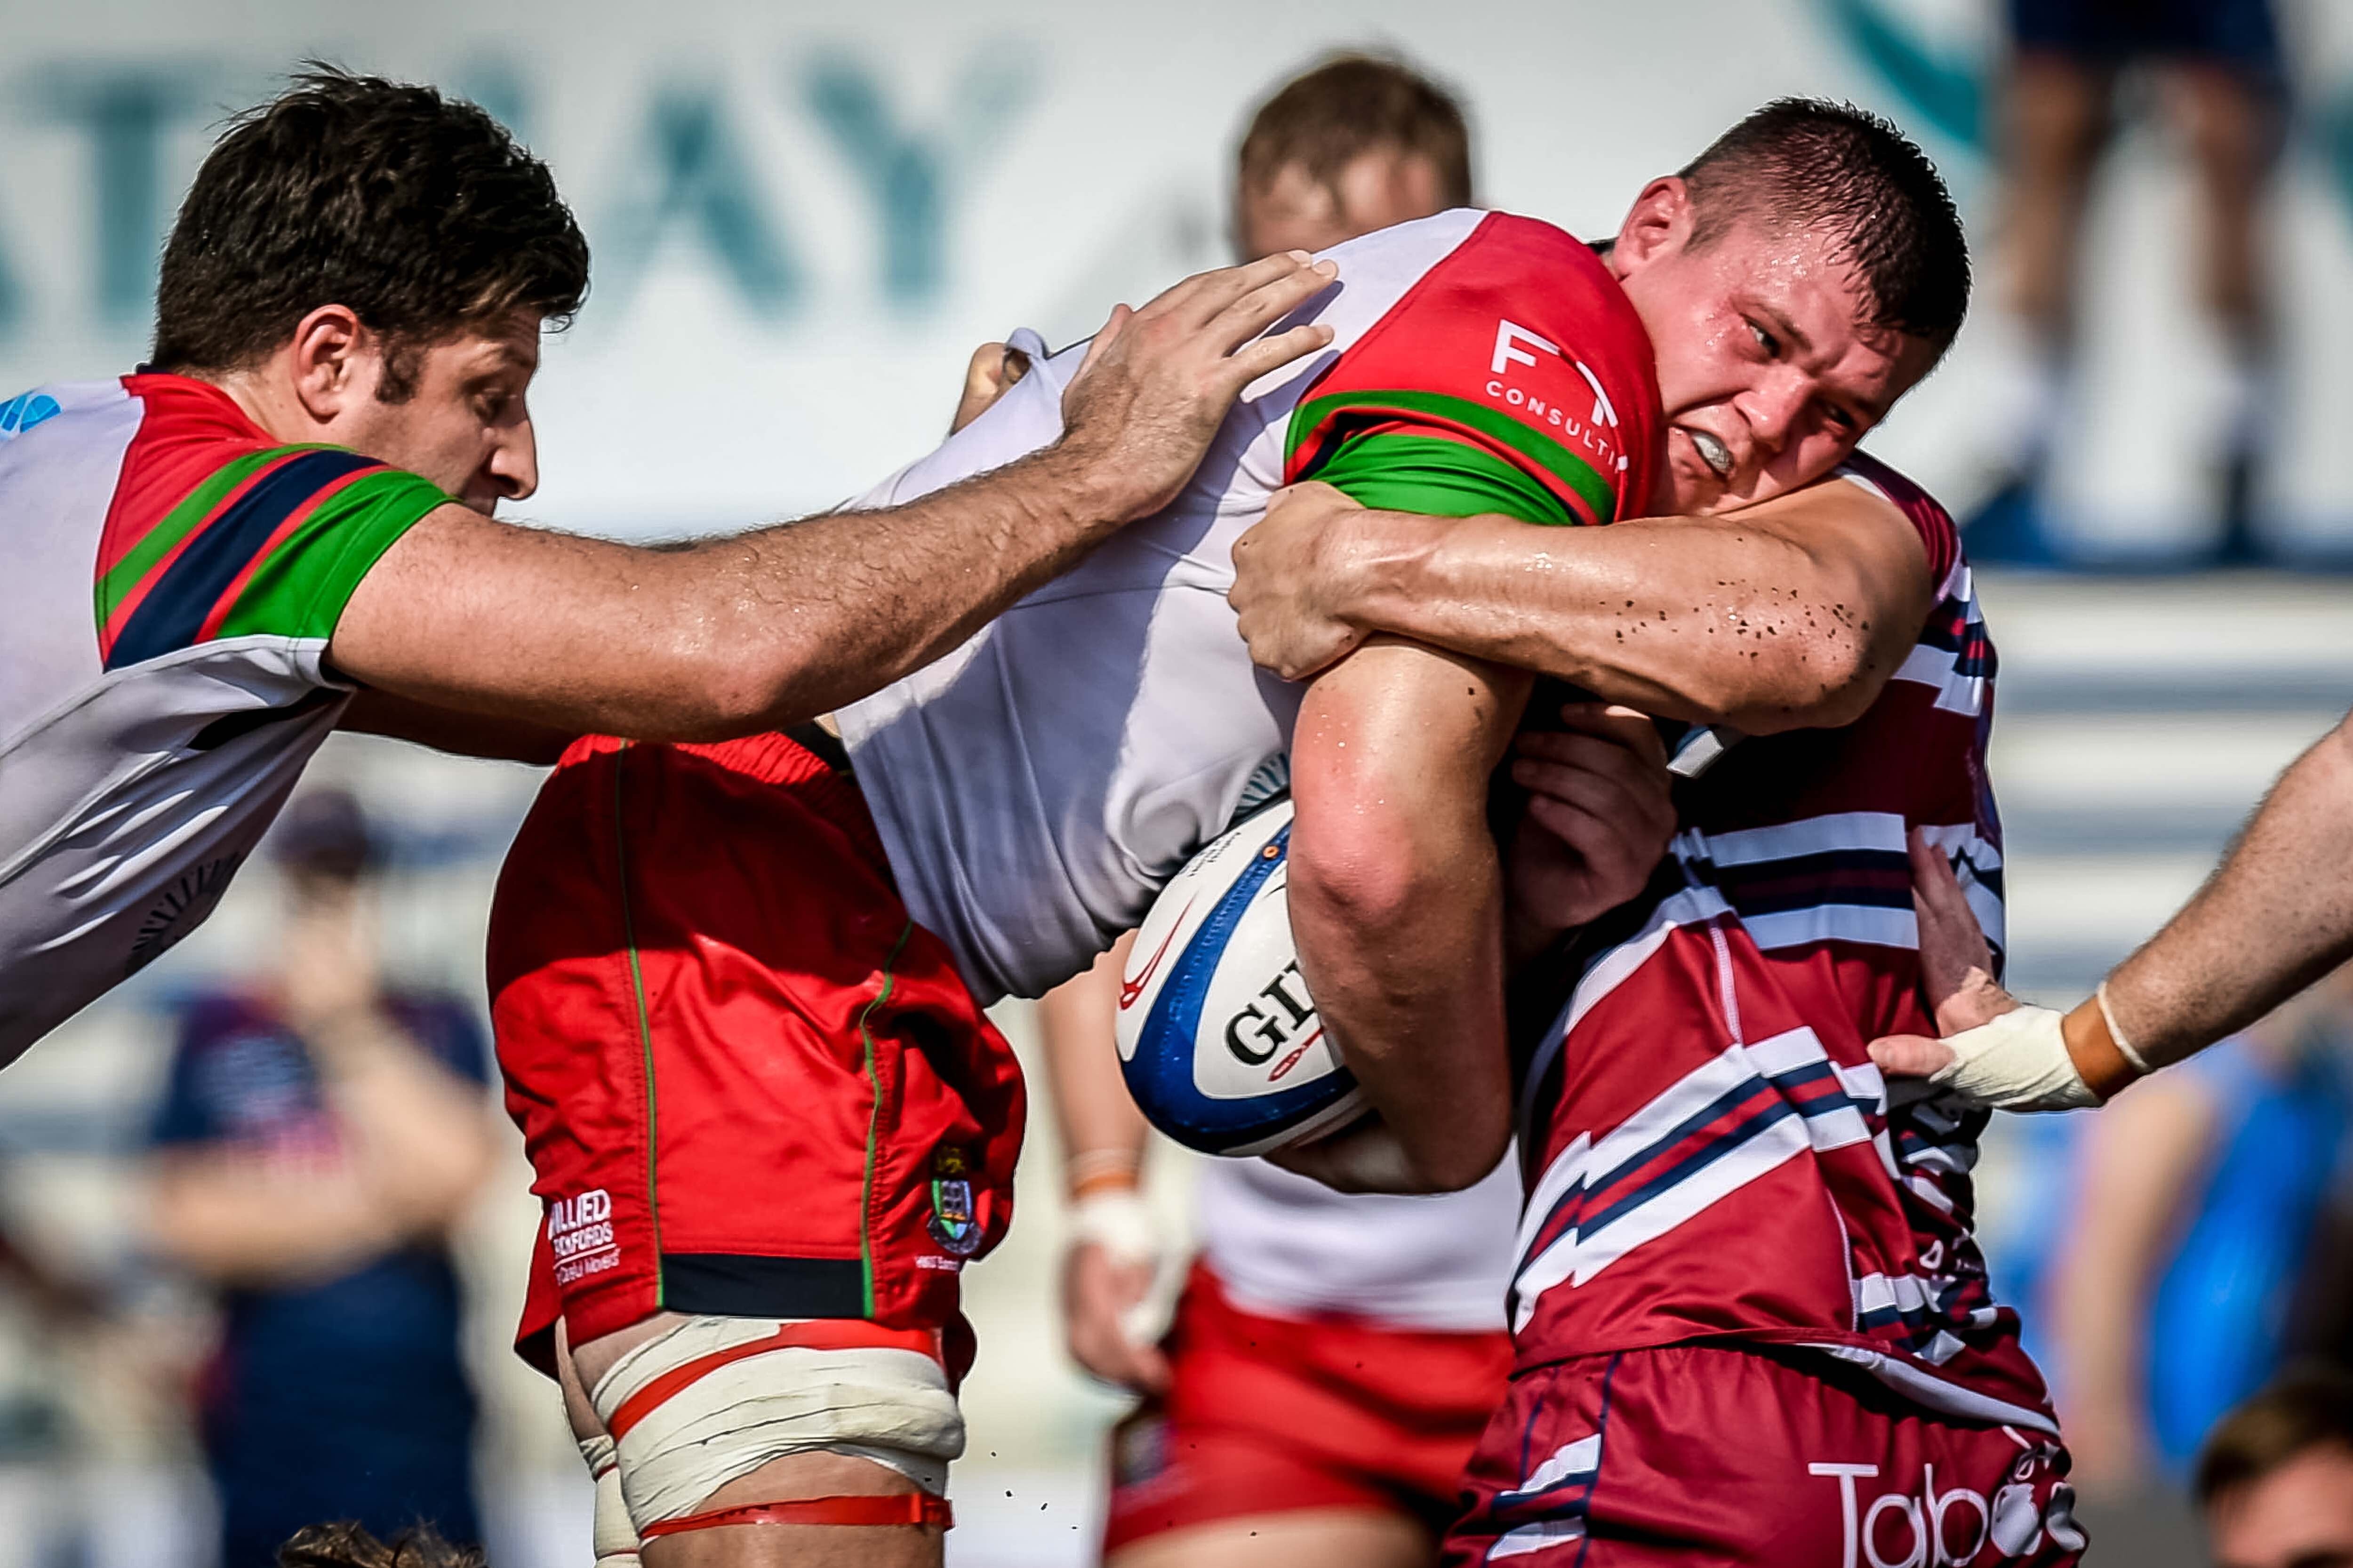 Sandy Bay captain Lewis Wilson against Kowloon in the men’s rugby Premiership. Photos: Ike Images